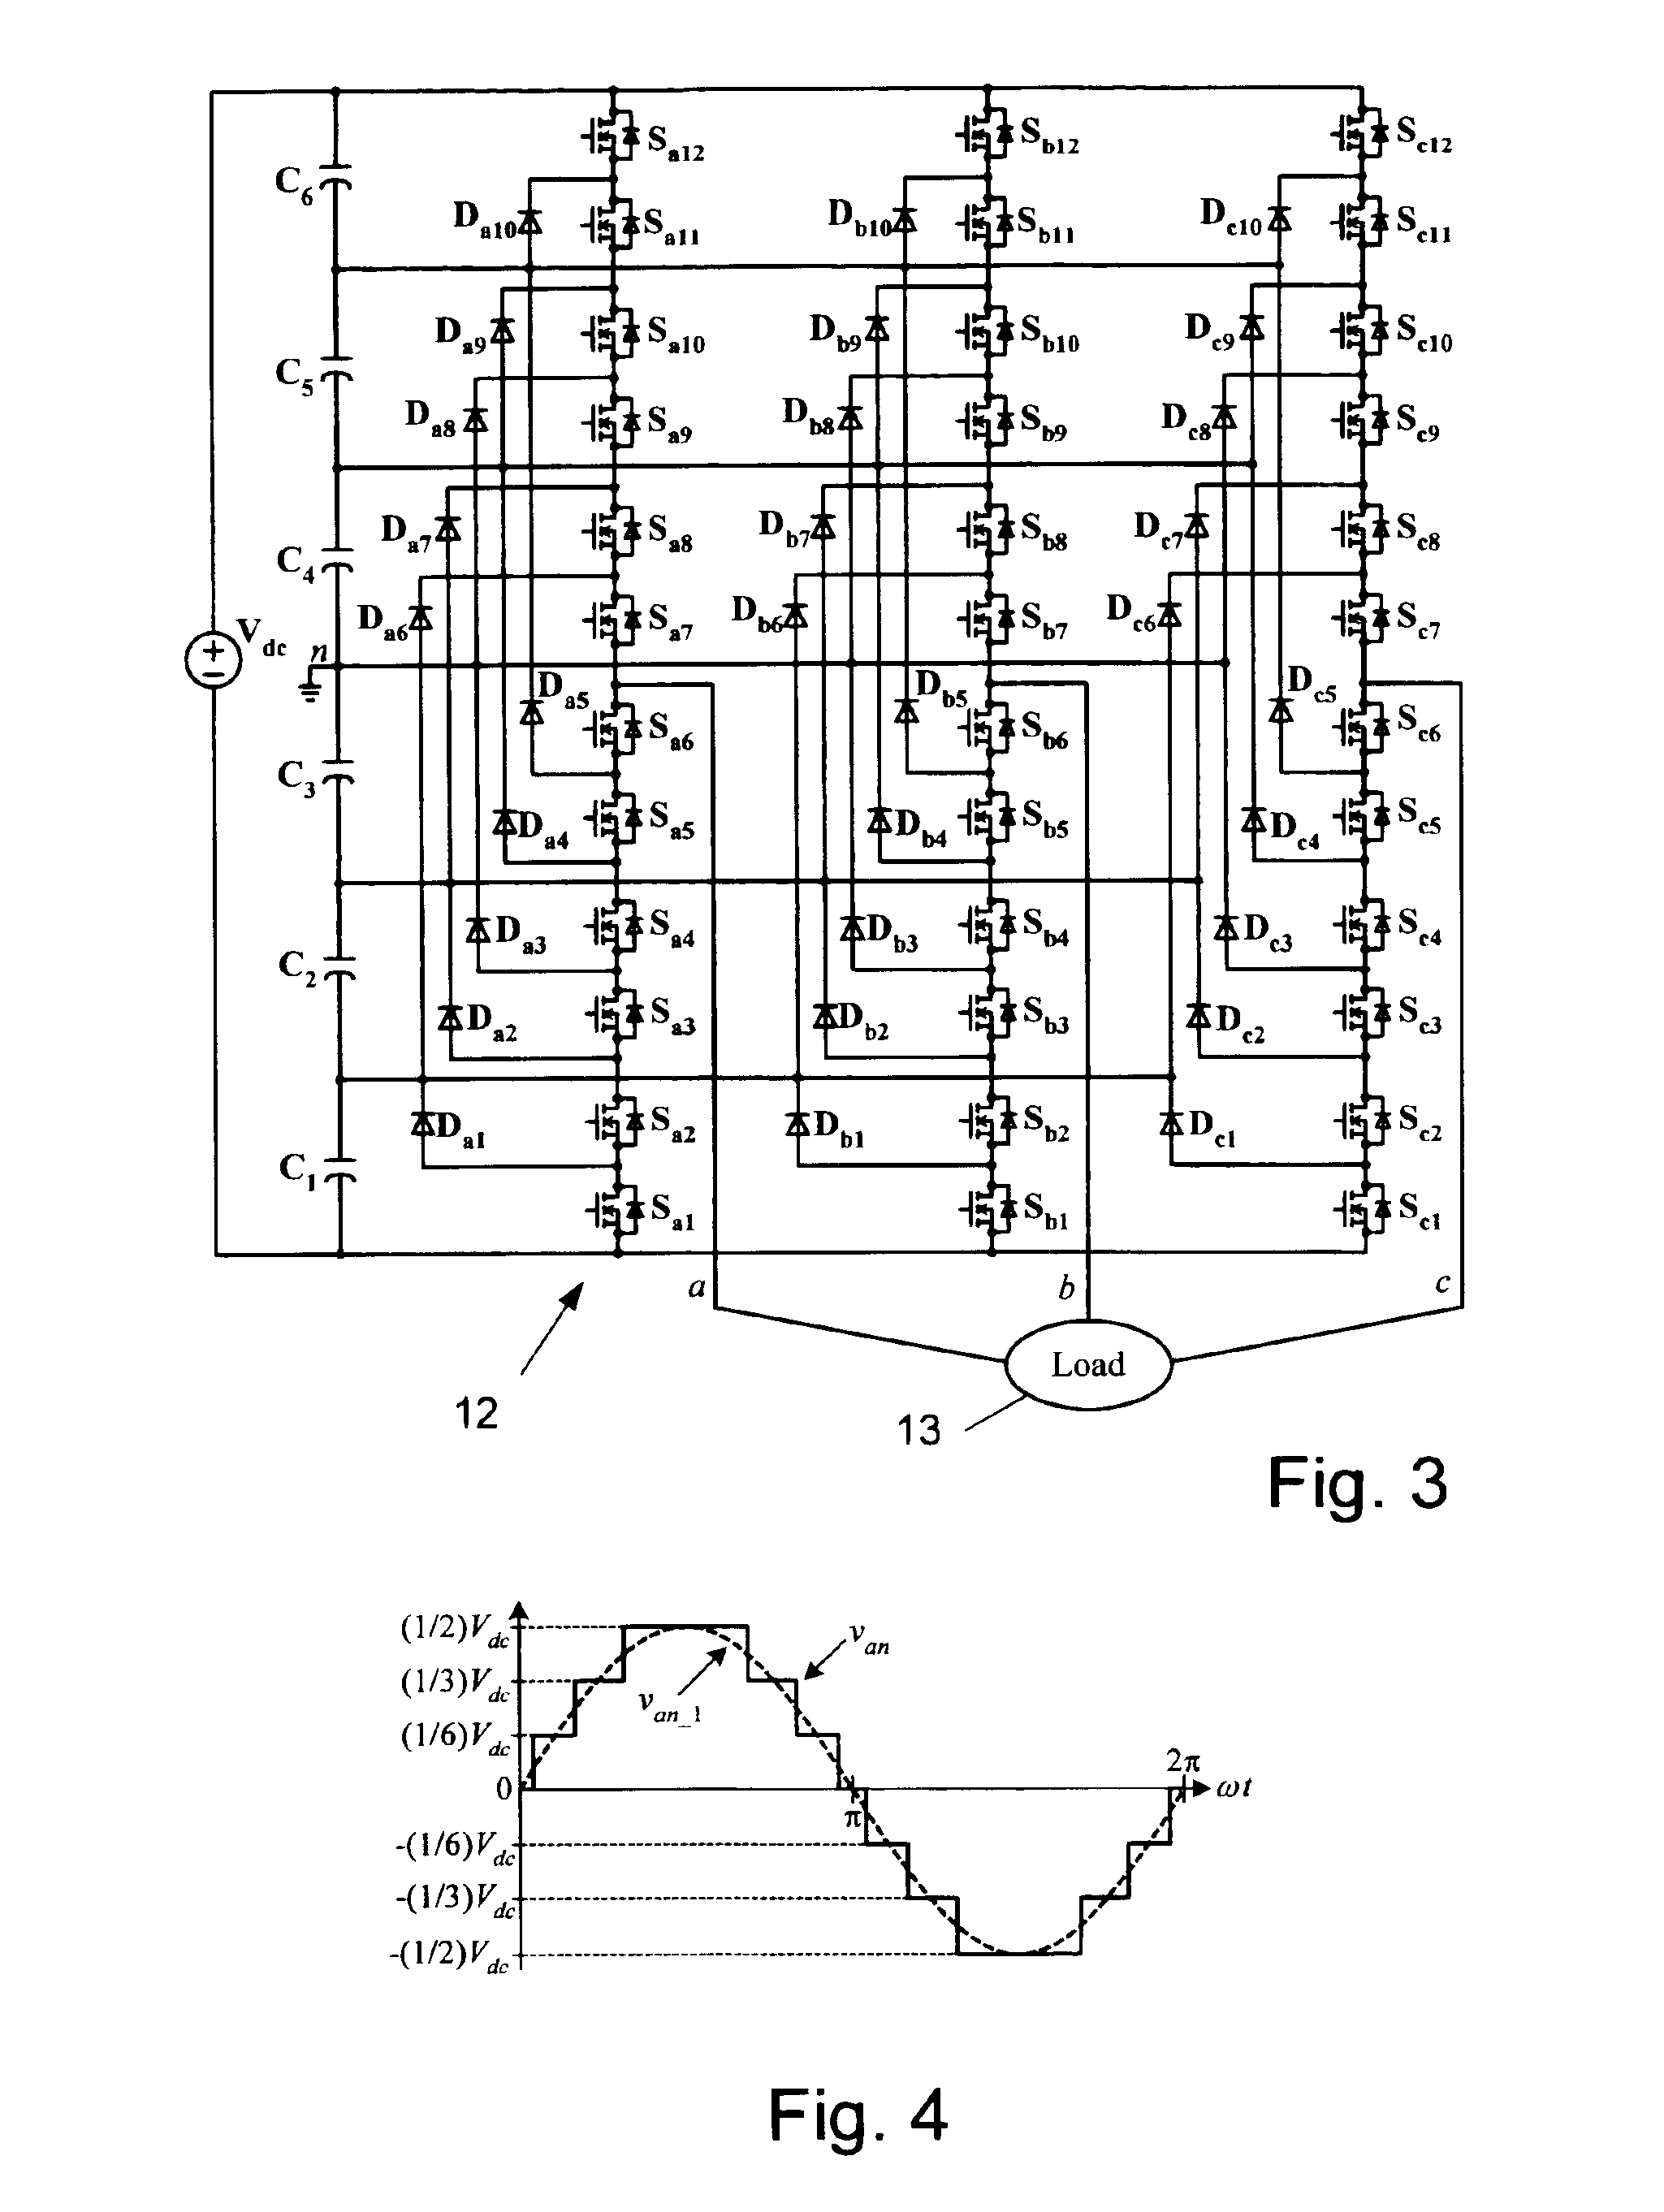 Multi-level dc bus inverter for providing sinusoidal and PWM electrical machine voltages